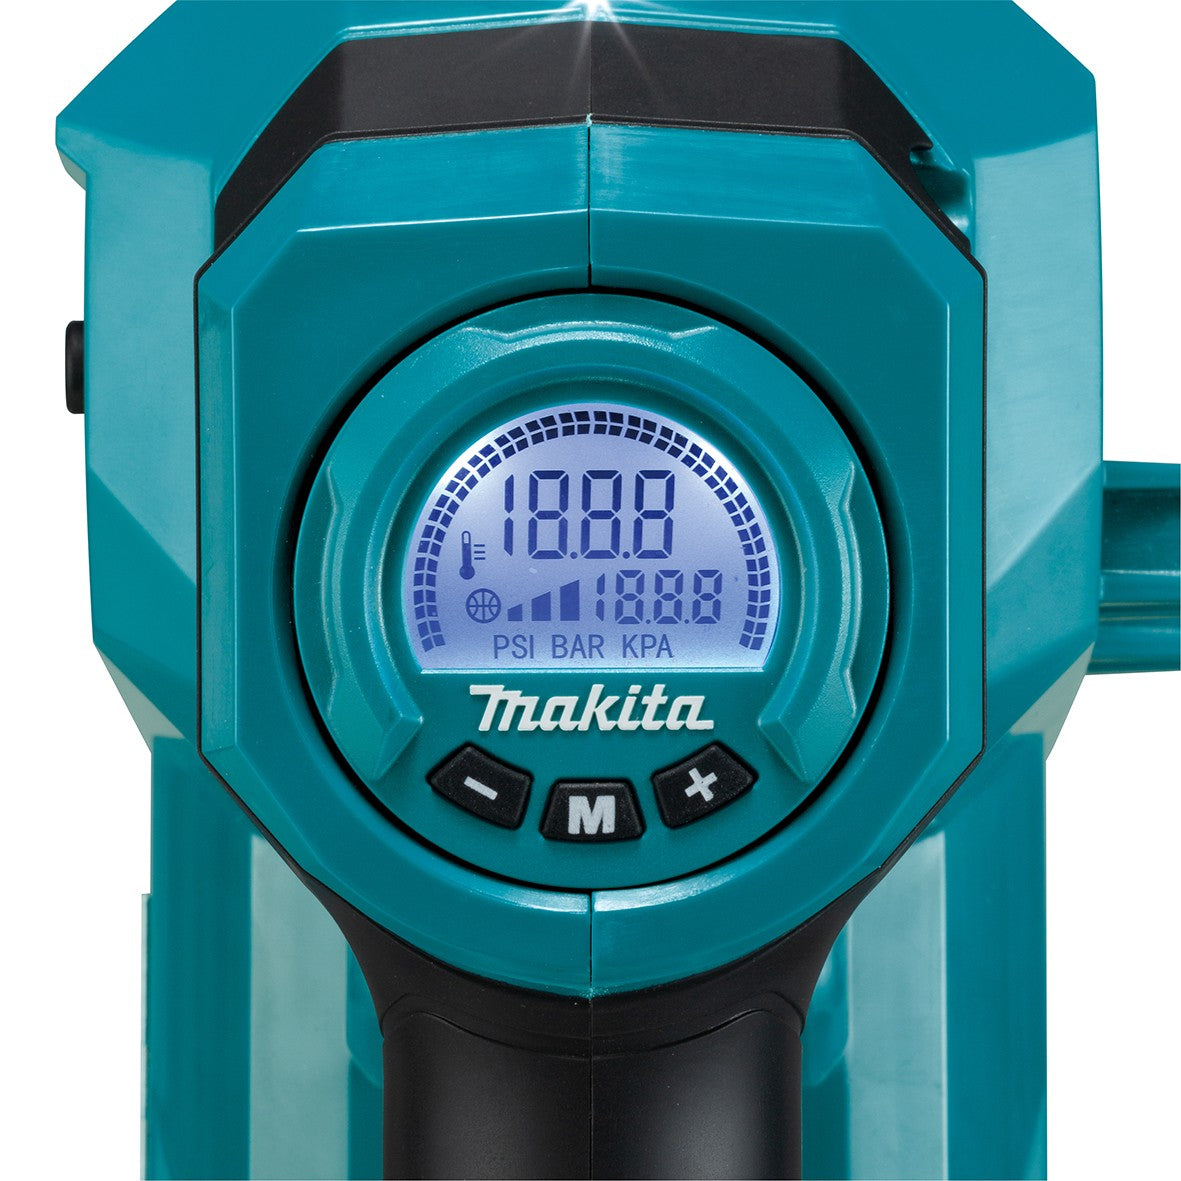 18V 161psi Inflator Bare (Tool Only) DMP181Z by Makita